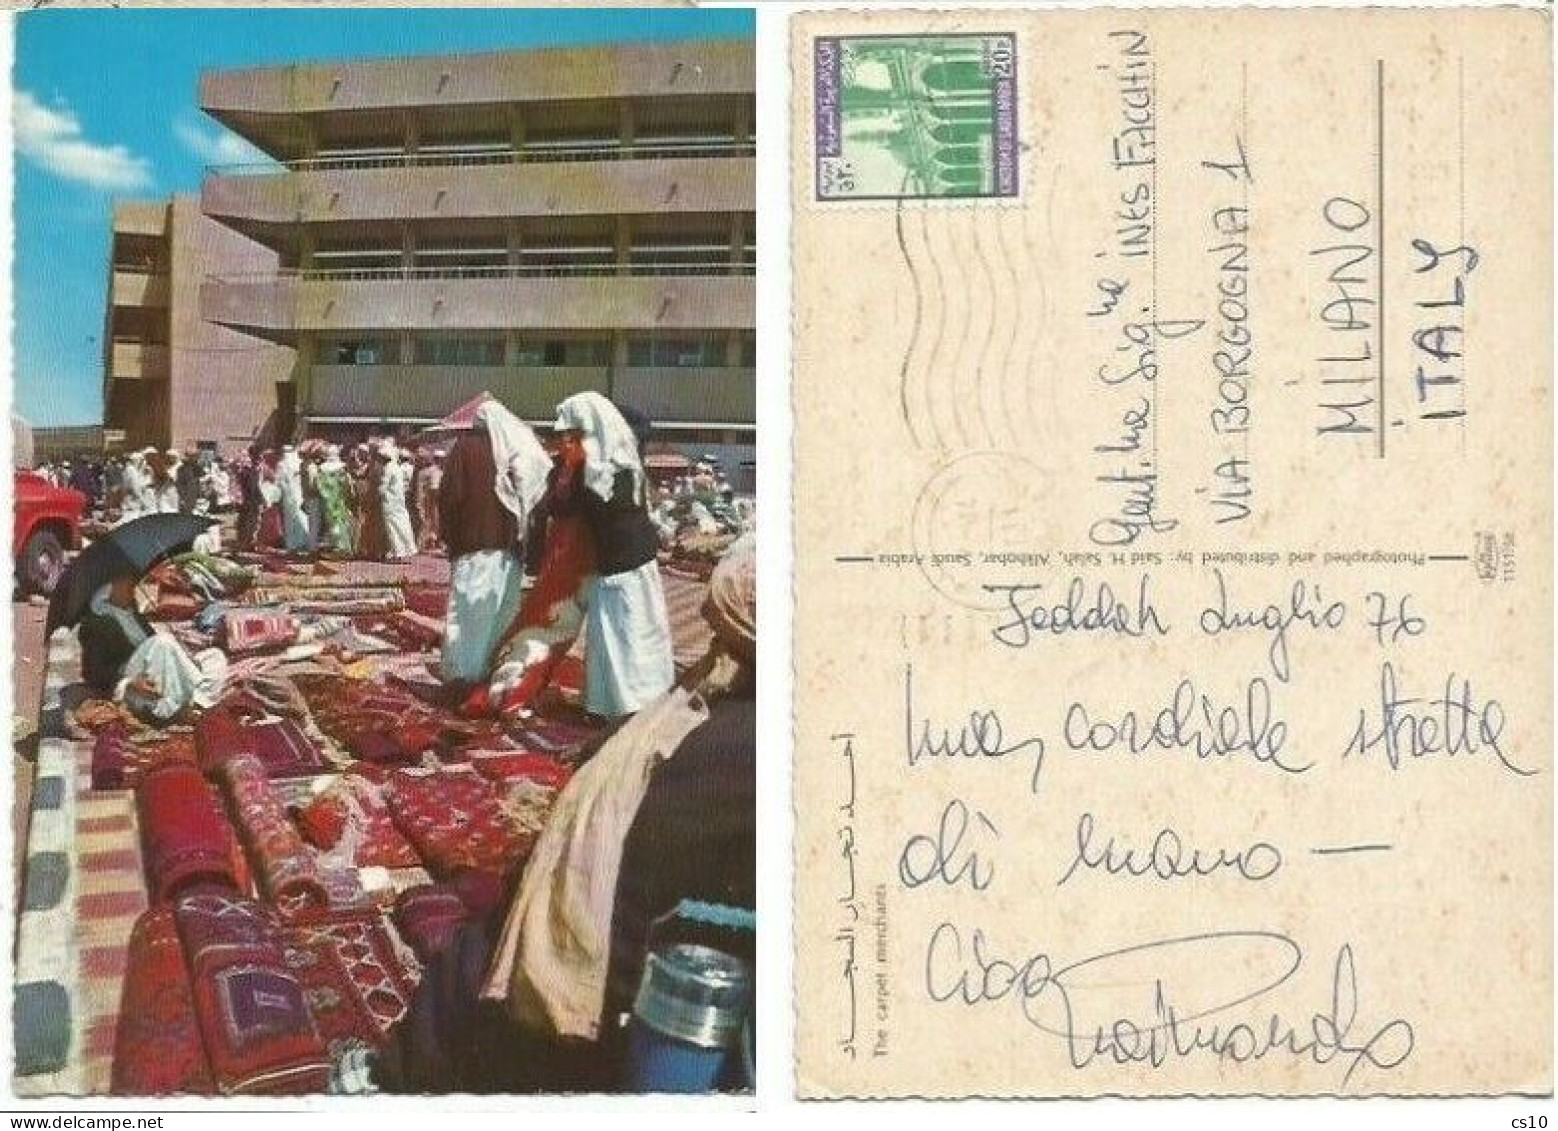 Saudi Arabia The Carpet Merchants - Pcard Jeddah July1976 X Italy With Regular Issue P.20 Solo Franking - Marchands